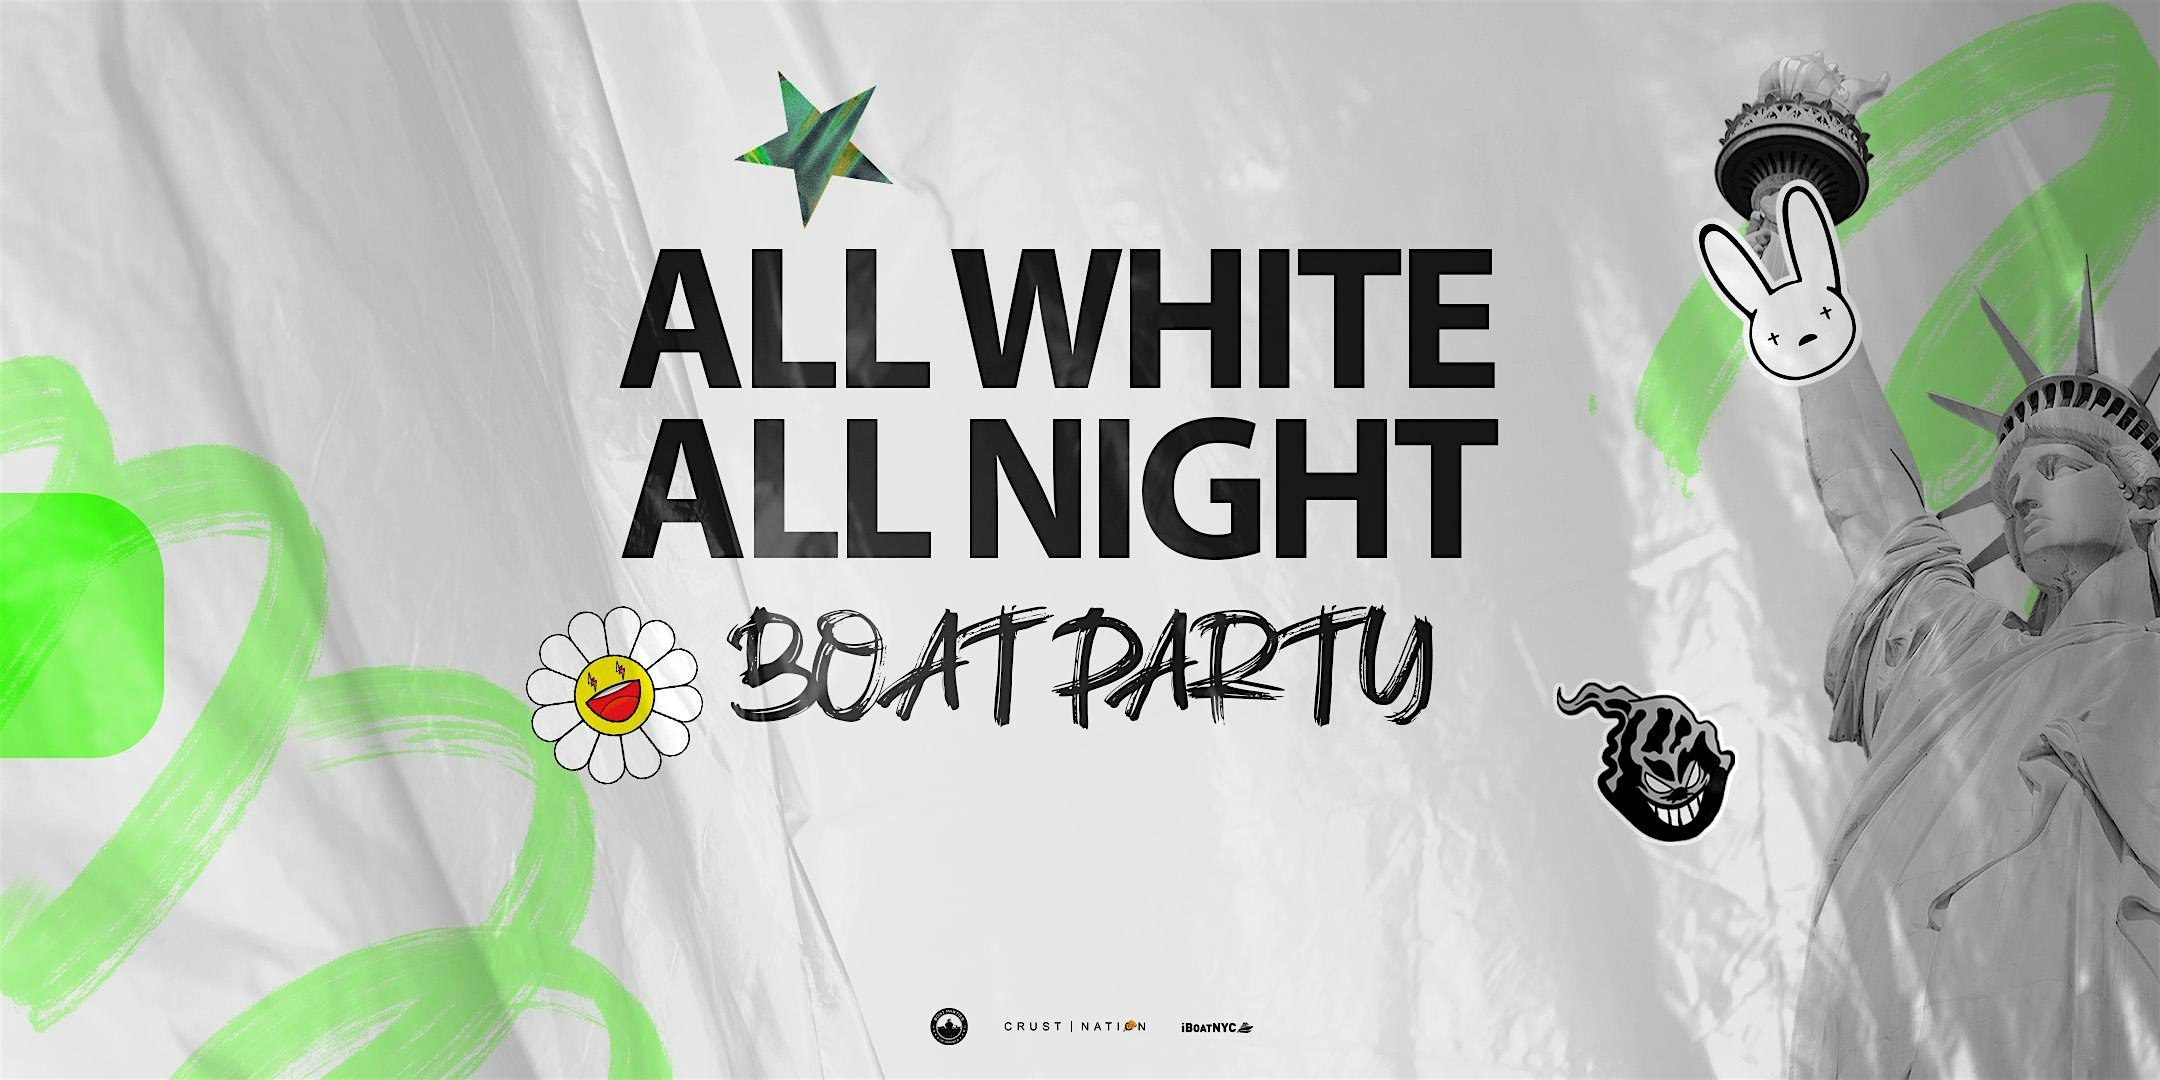 ALL WHITE OUT Boat Party Yacht Cruise NYC - Labor Day Weekend